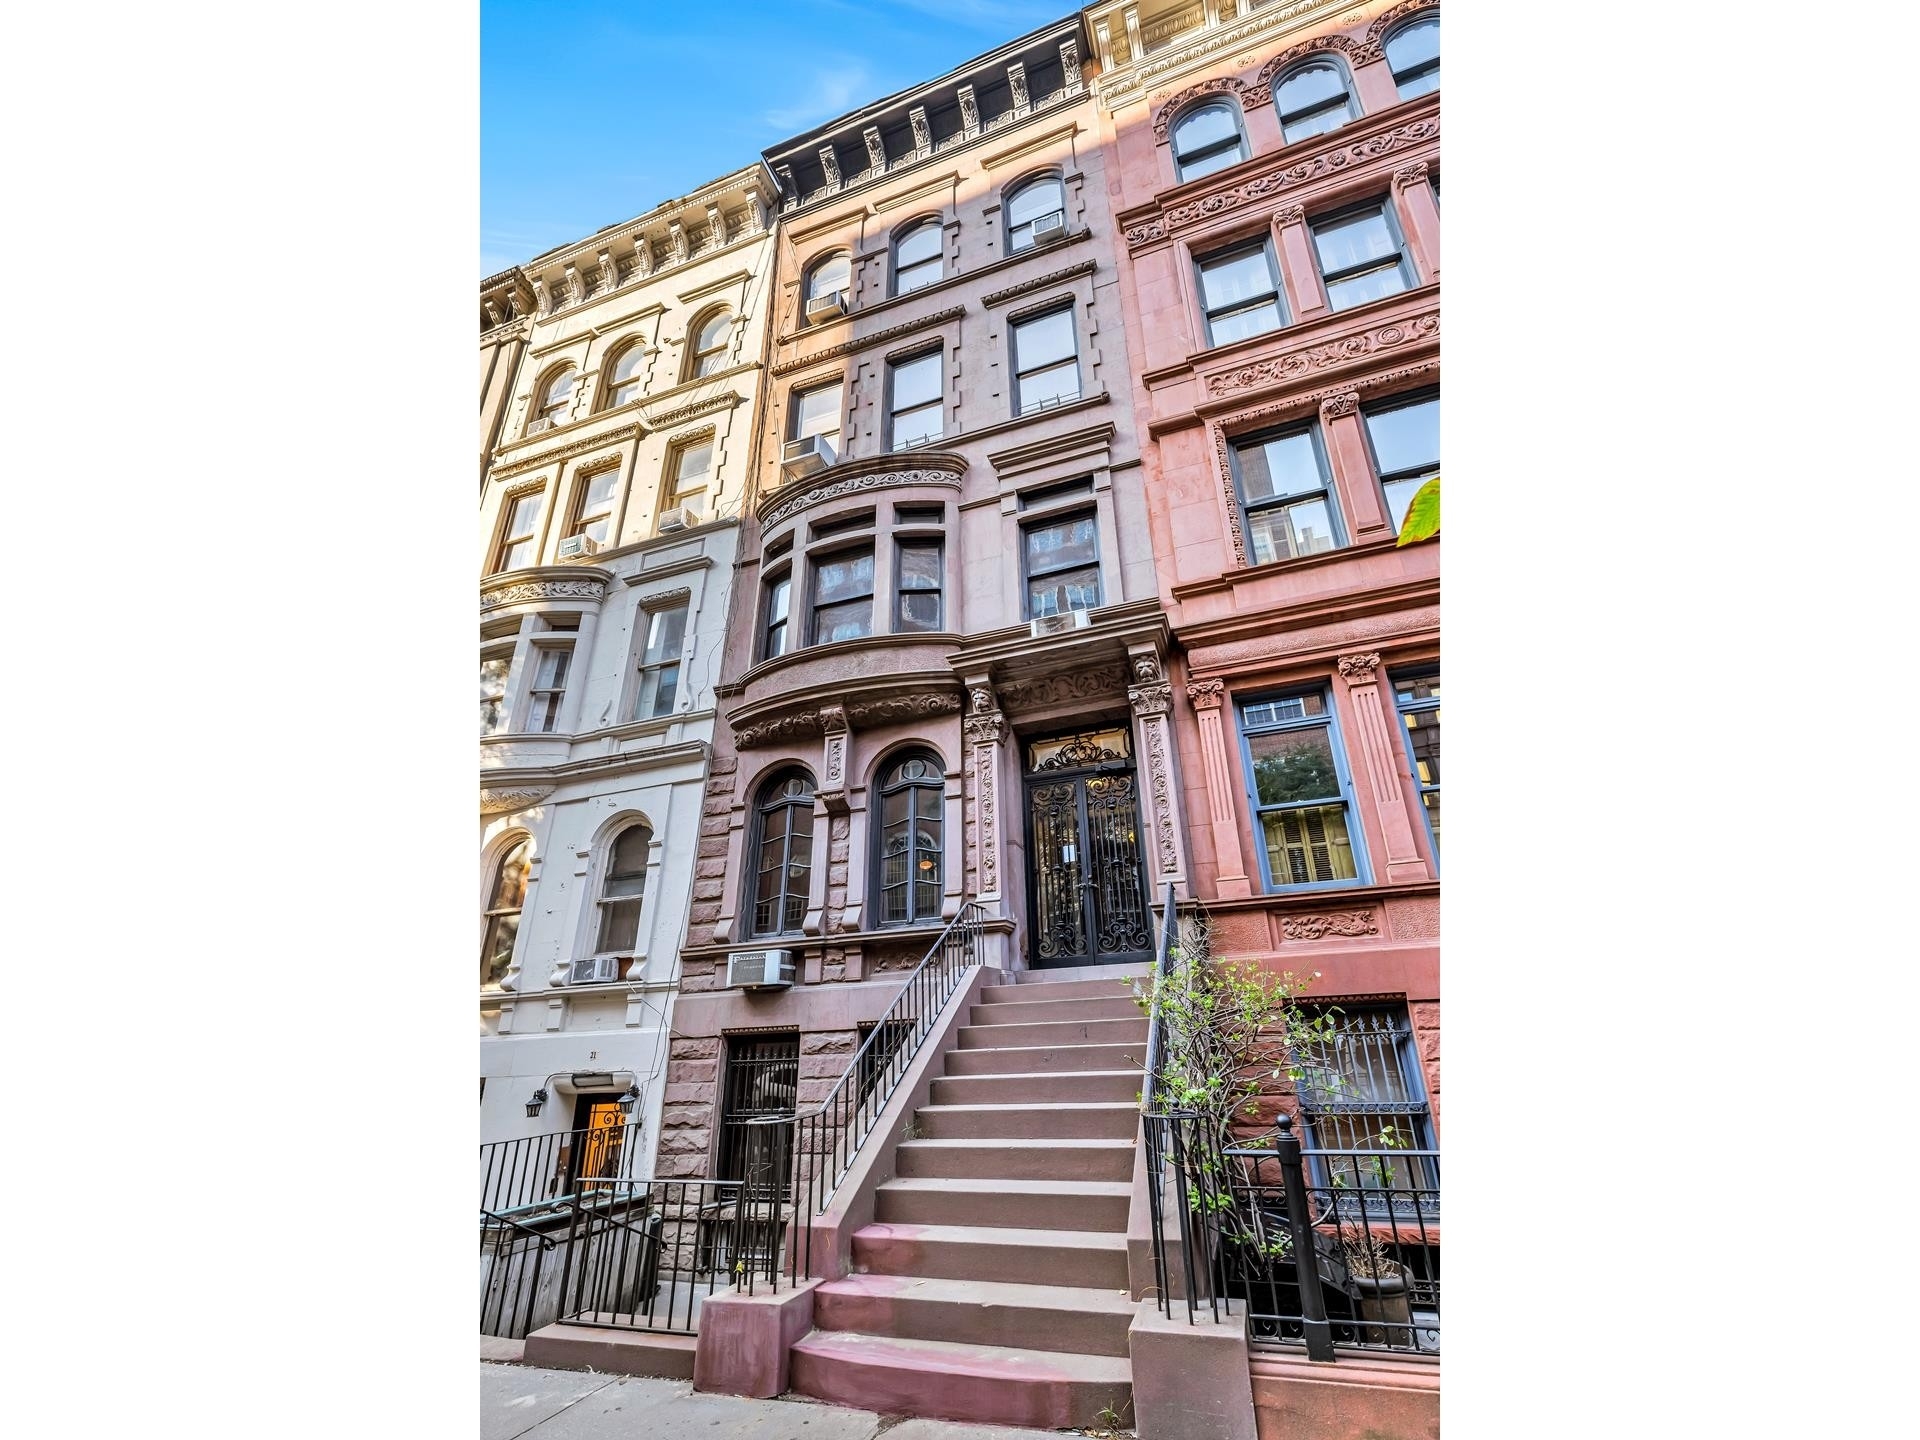 Multi Family Townhouse for Sale at 23 E 92ND ST, TOWNHOUSE Carnegie Hill, New York, NY 10128